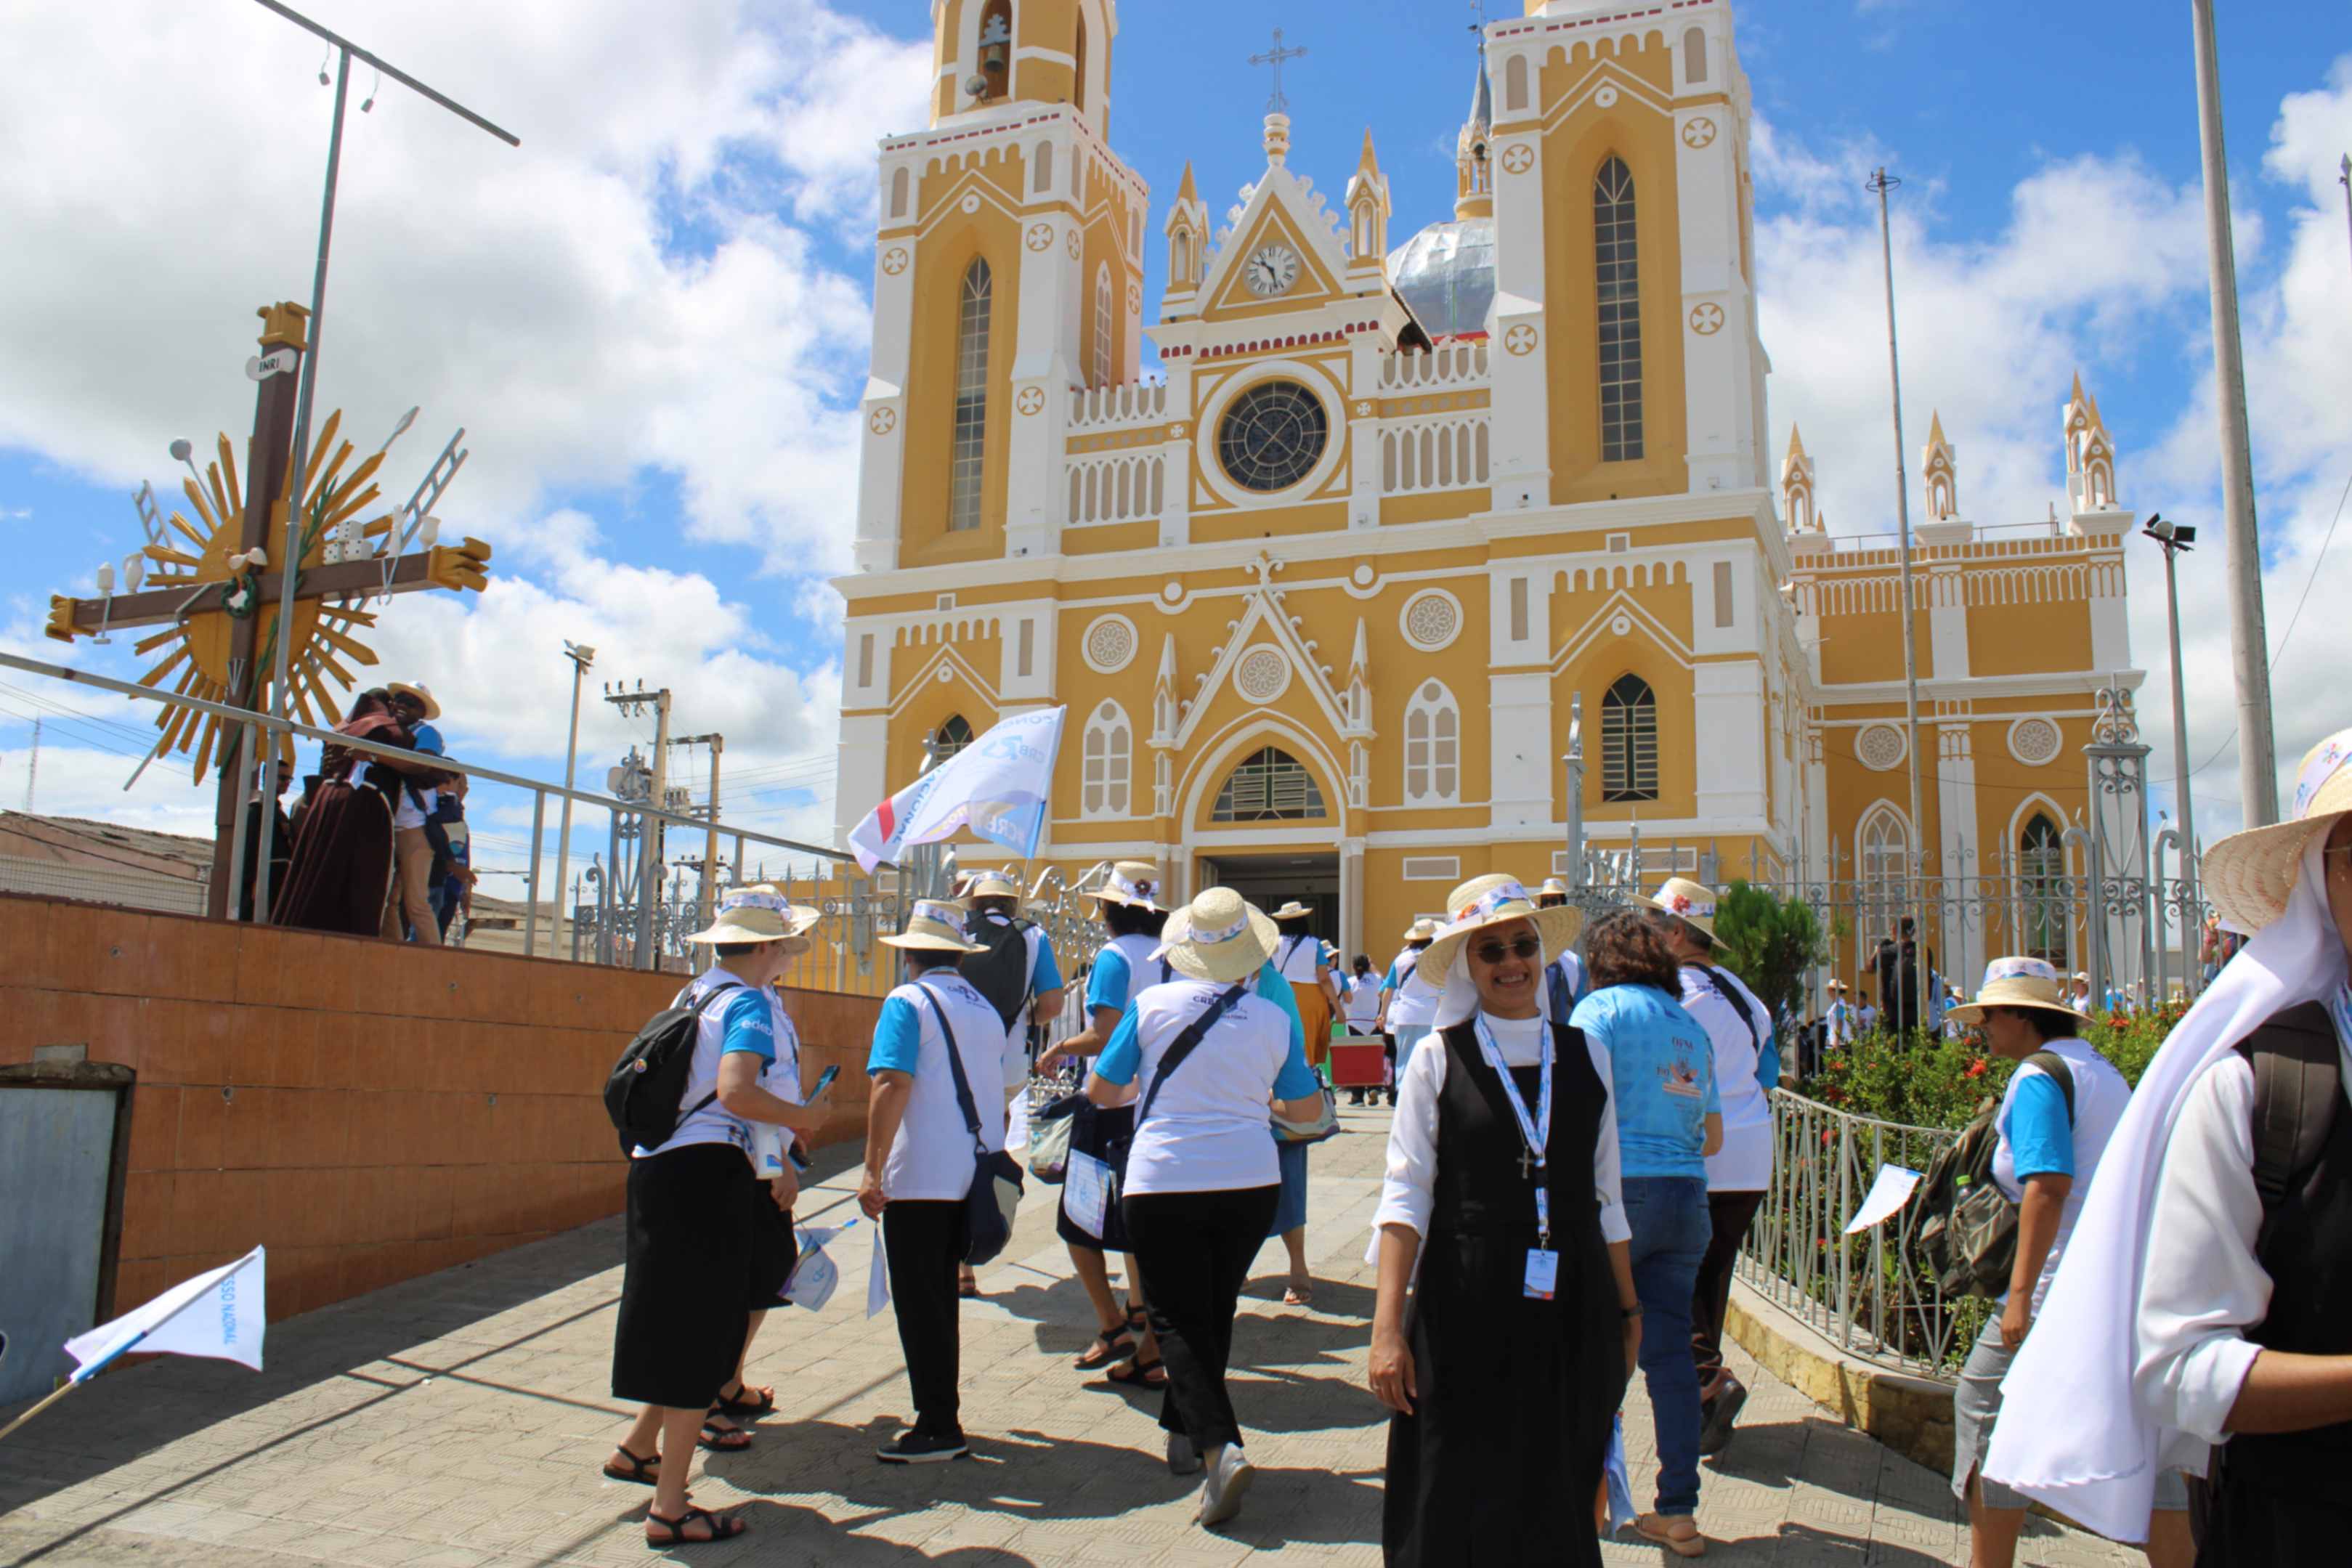 Participants celebrating the 70th anniversary of the Conference of Religious in Brazil take a day to make a pilgrimage to the Sanctuary St. Francis of the Stigmata in Caninde, Ceara.